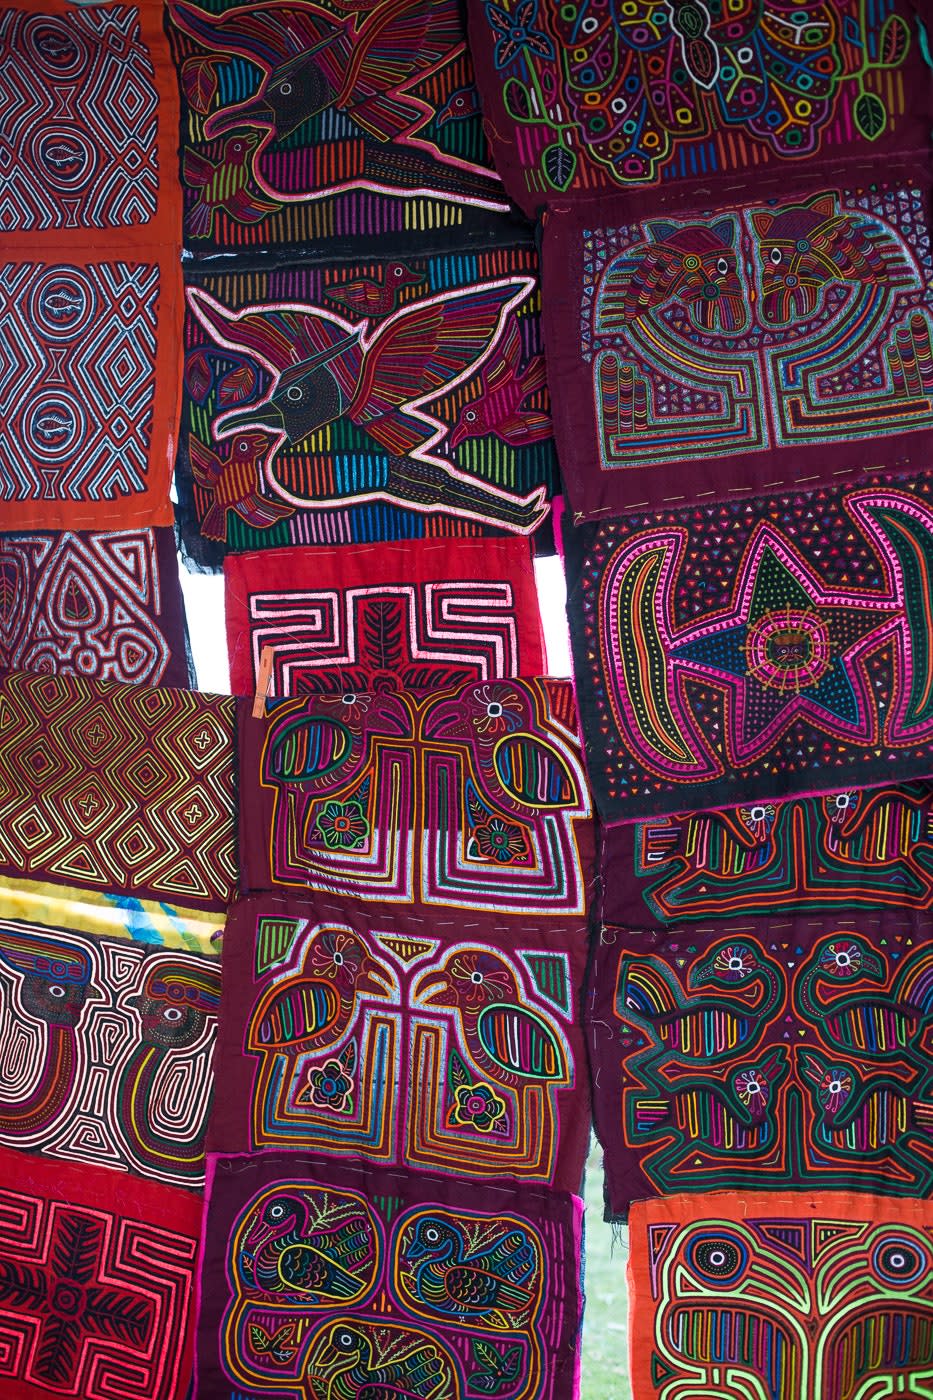 The San Blas archipelago is home to the Guna (previously known as Kuna), an Indigenous group known for their colorfully embroidered clothing.